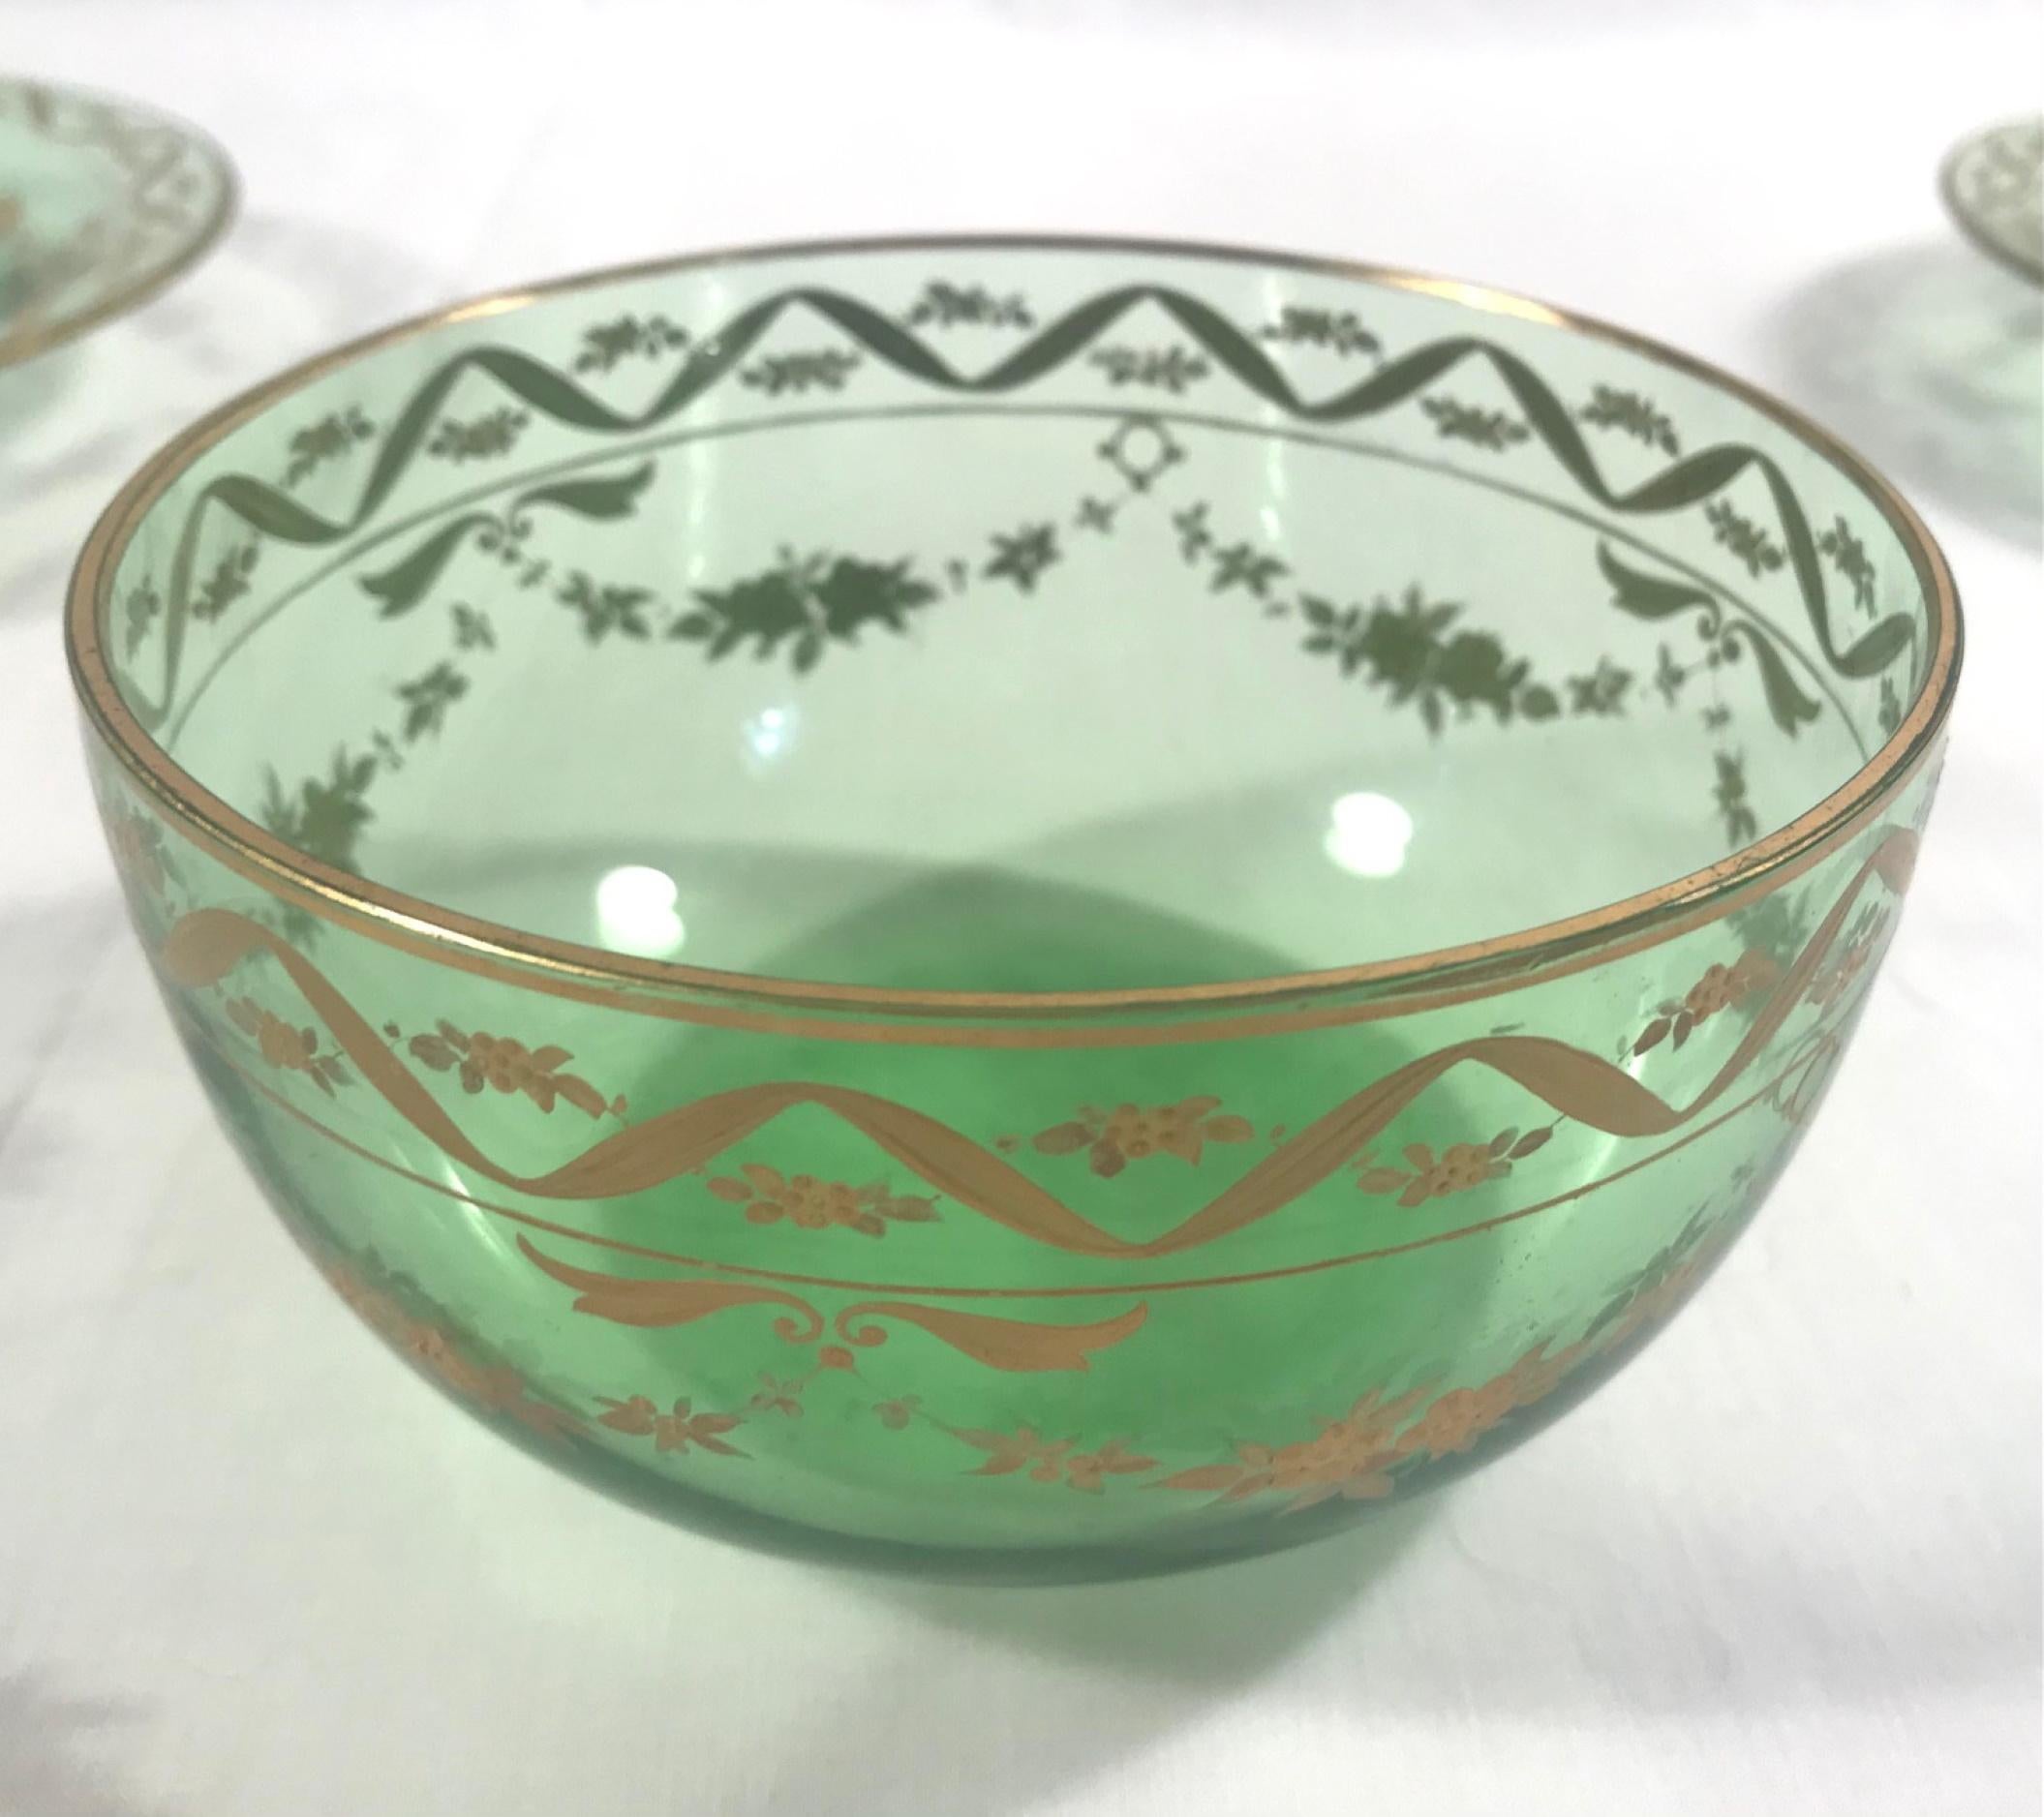 Blown Glass 19th Century Lobmeyr Gold Enameled Emerald Fruit Bowls and Under Plates Set of 5